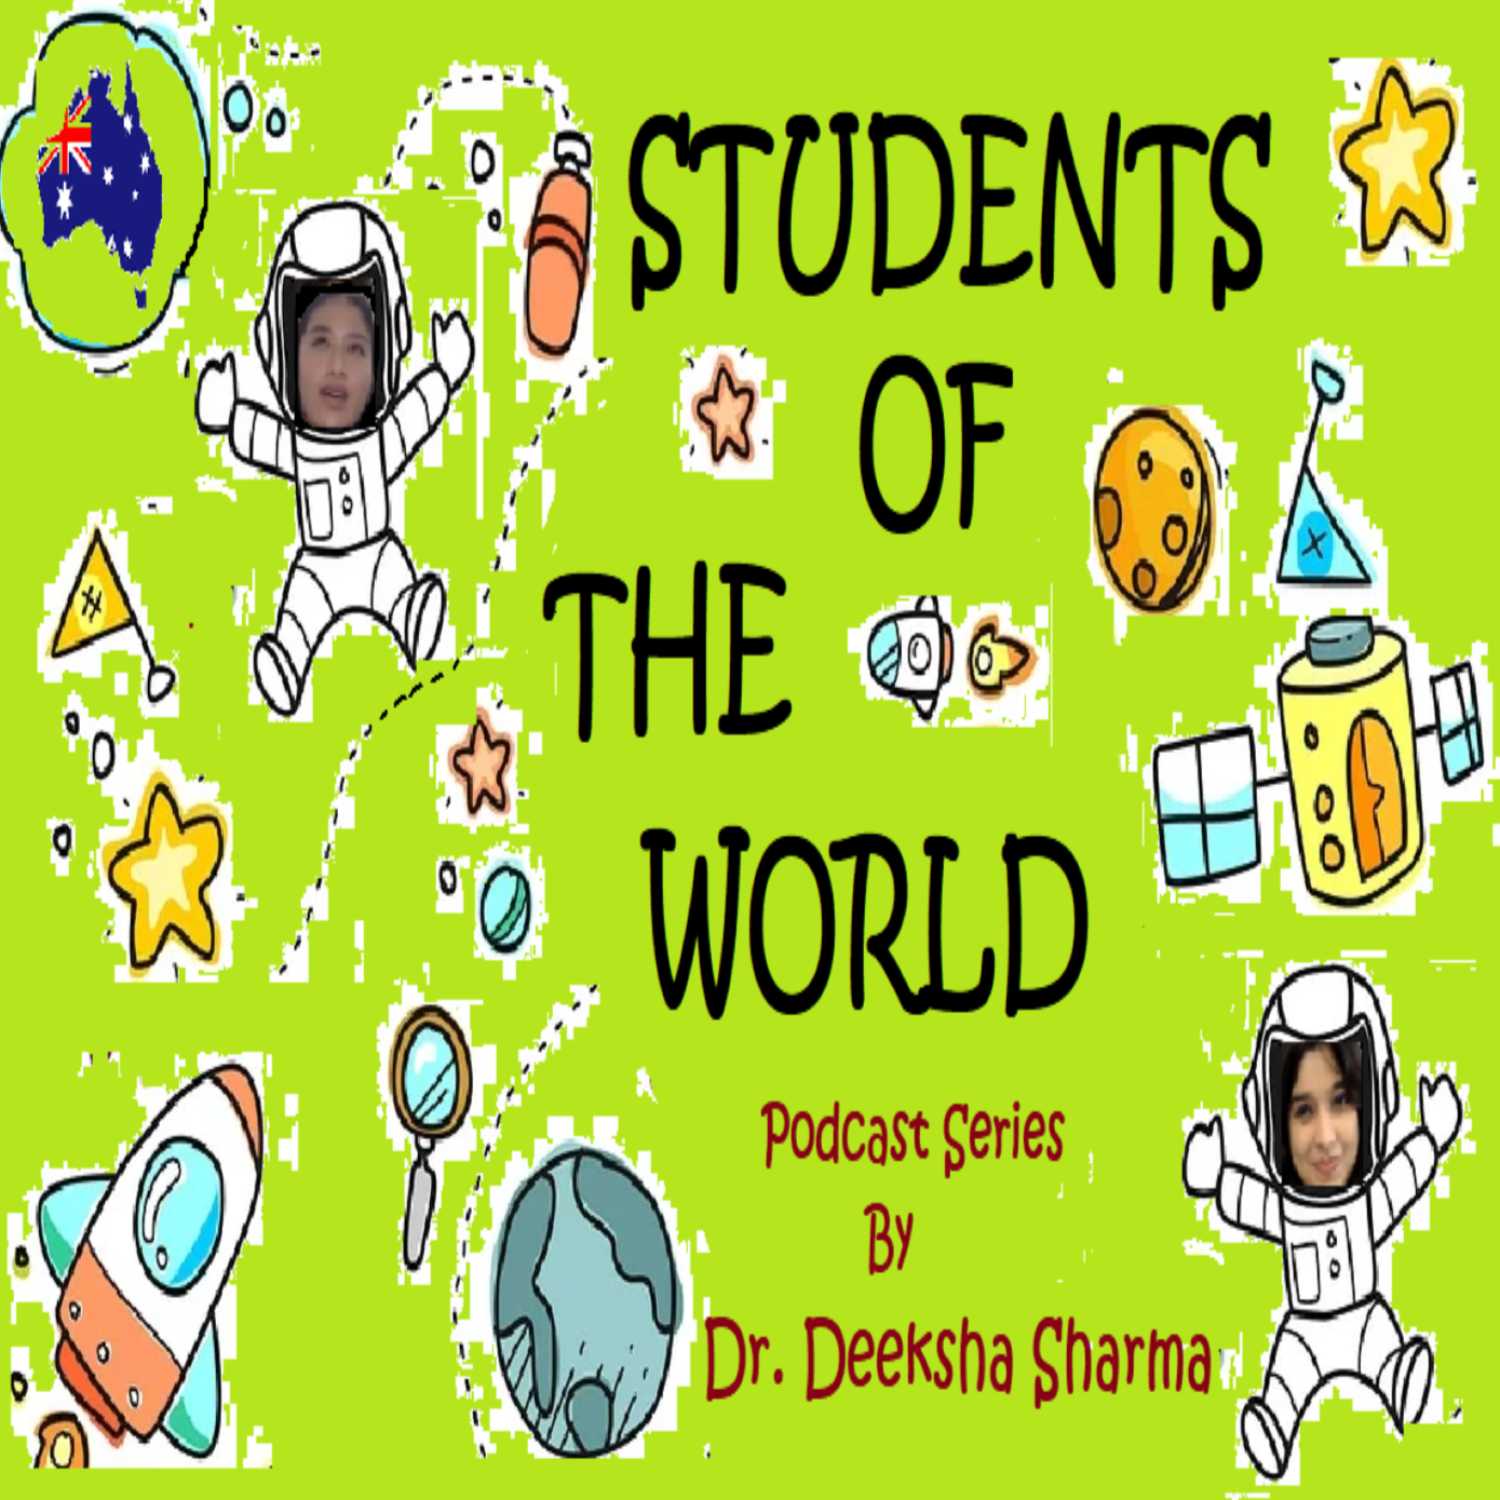 STUDENTS OF THE WORLD Podcast #1 by Dr. Deeksha Sharma: Talking with Tamara from #UNSW​ #Australia